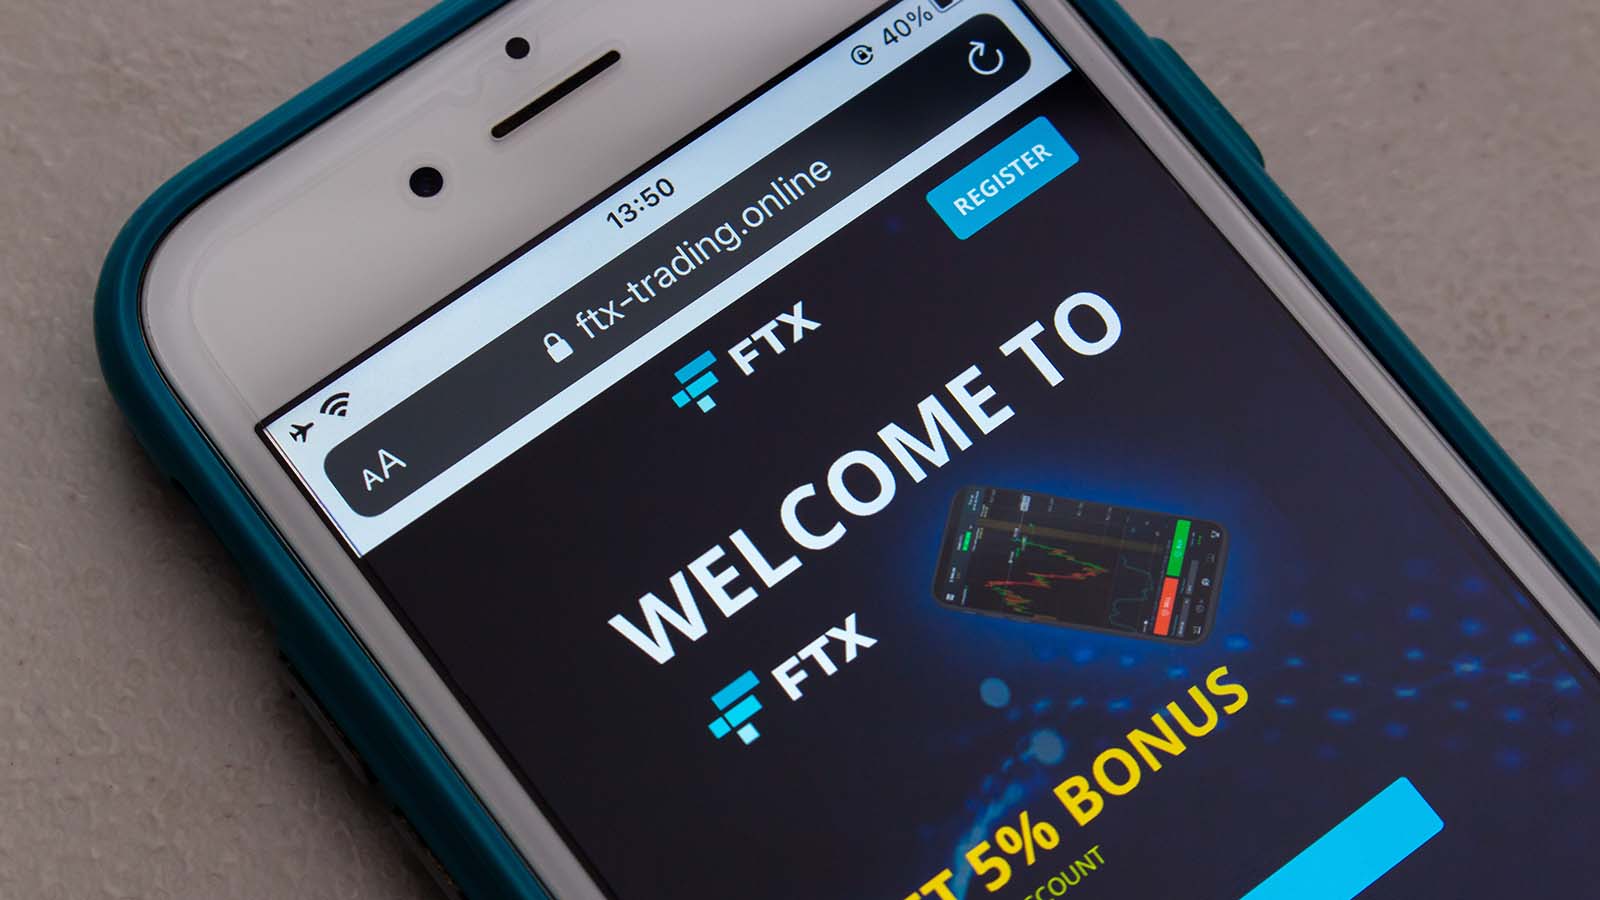 The website for the FTX exchange is displayed on an iPhone screen.